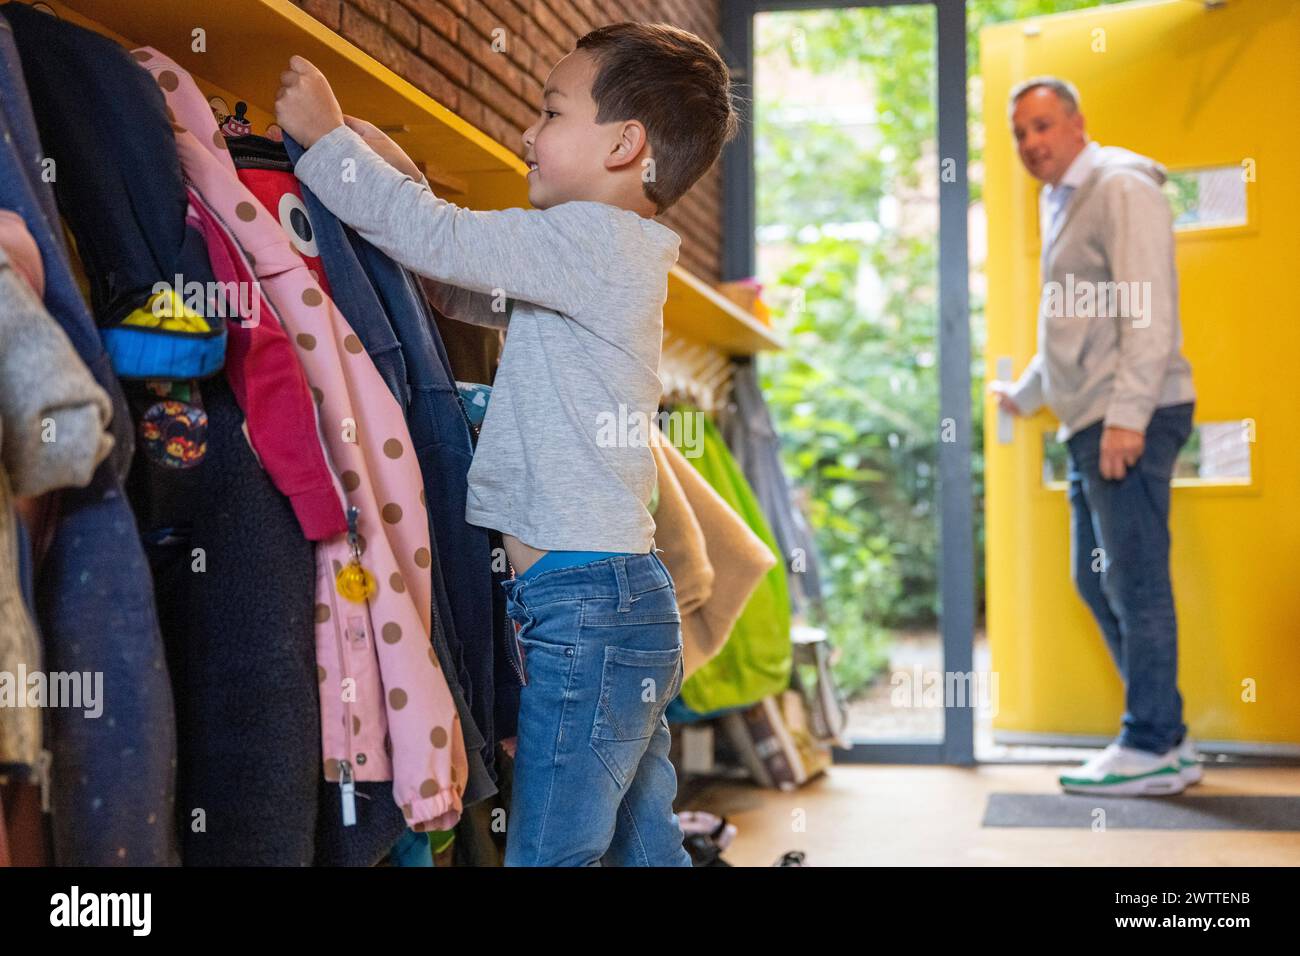 Young boy hanging up his coat at school with a teacher in the background. Stock Photo